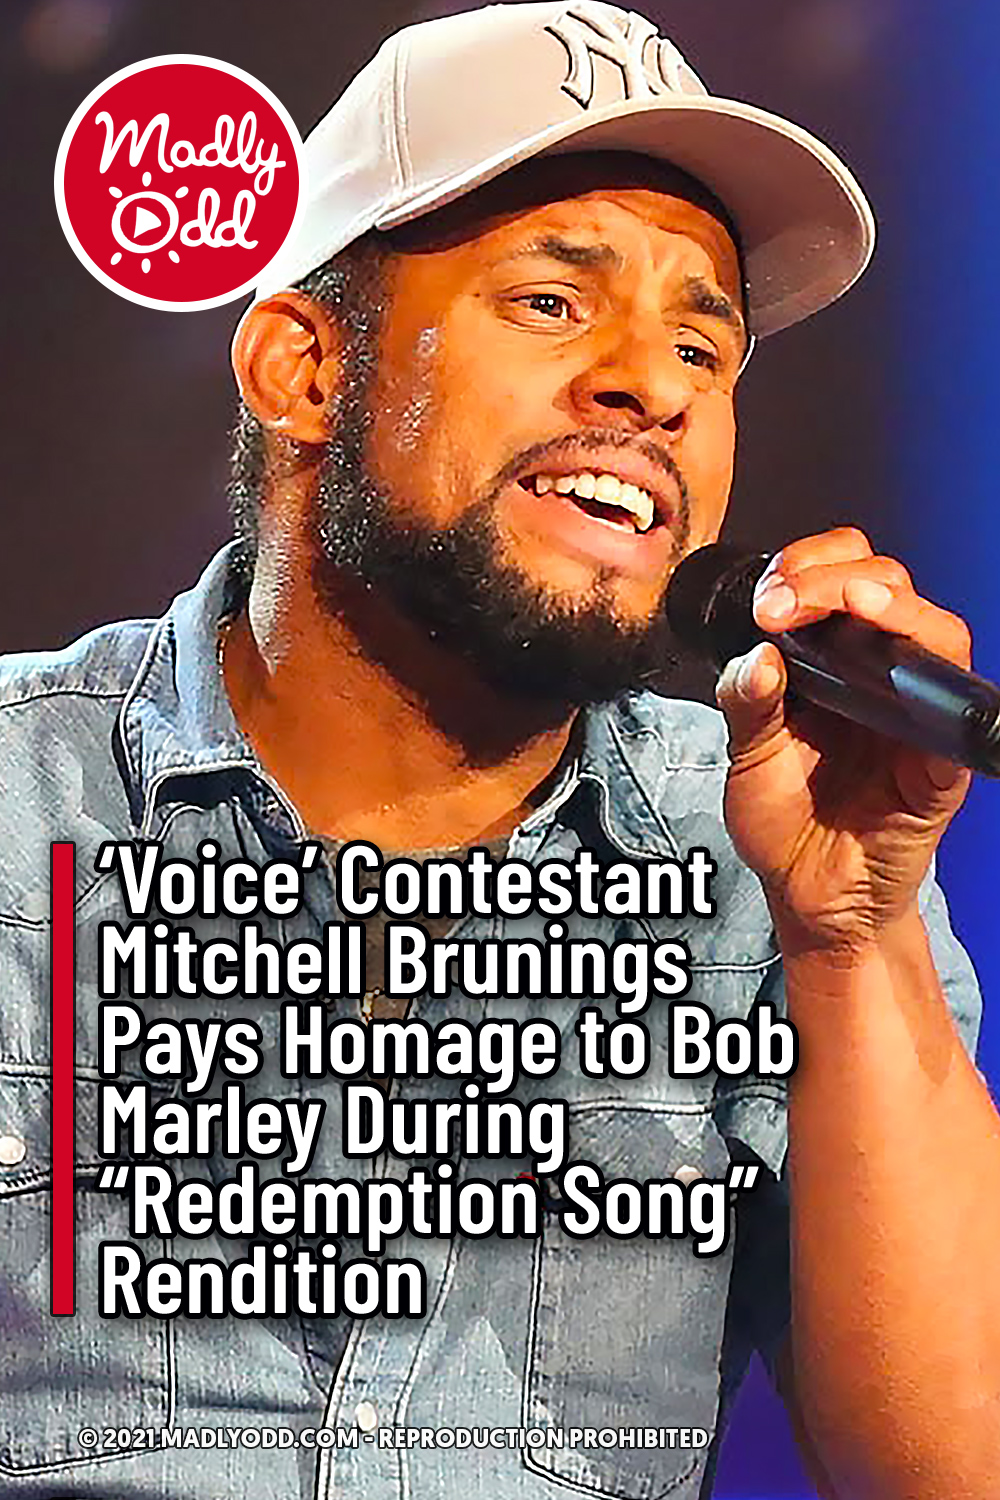 ‘Voice’ Contestant Mitchell Brunings Pays Homage to Bob Marley During “Redemption Song” Rendition